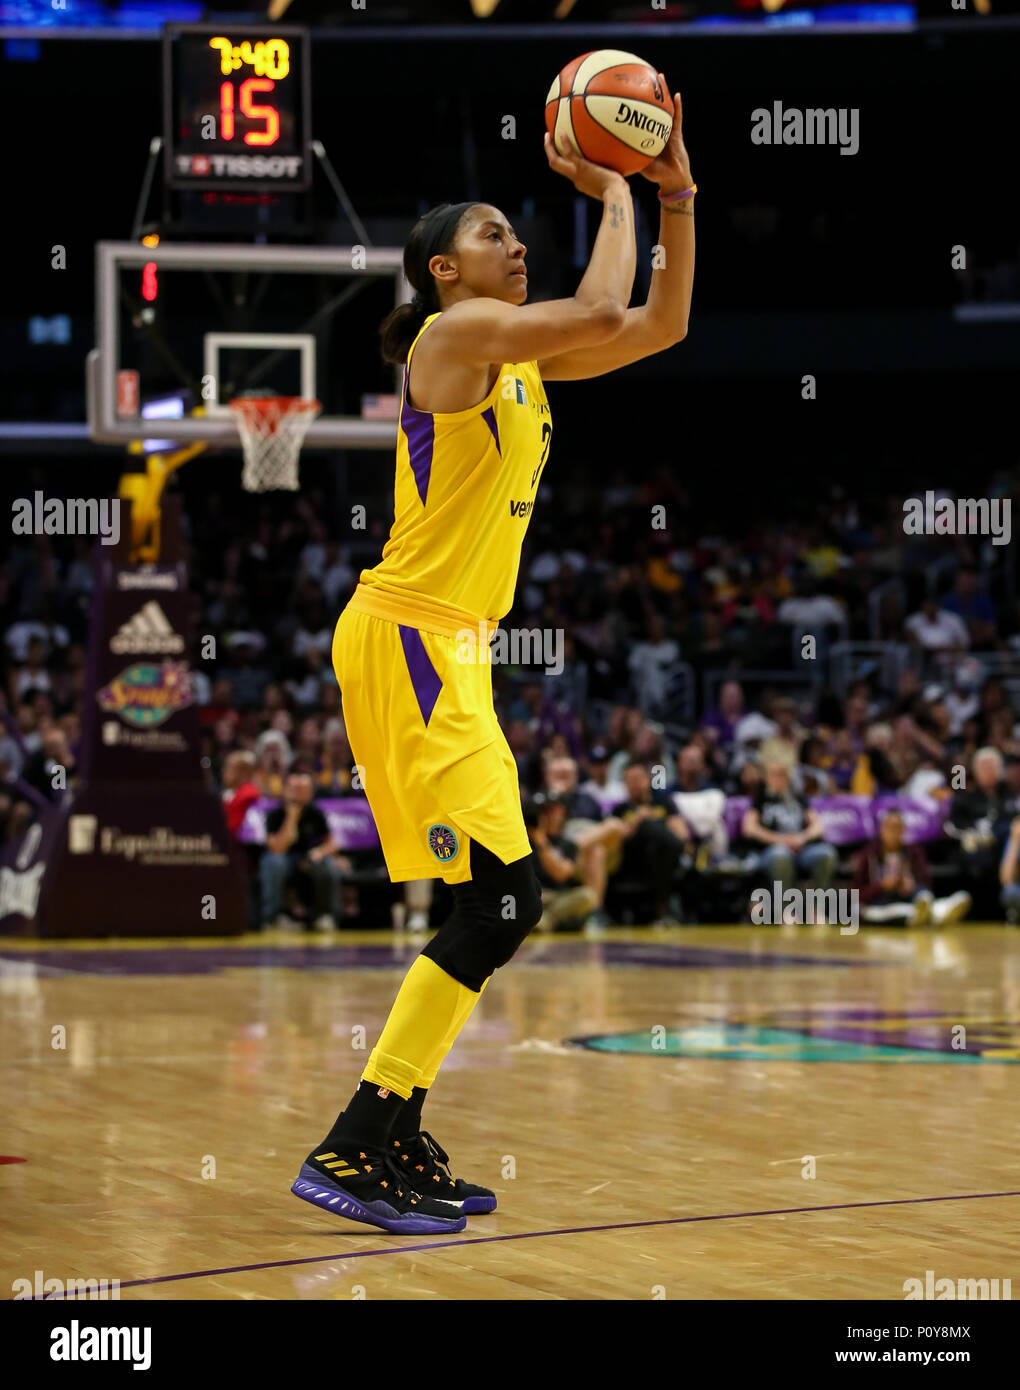 candace parker wallpaper chicago sky